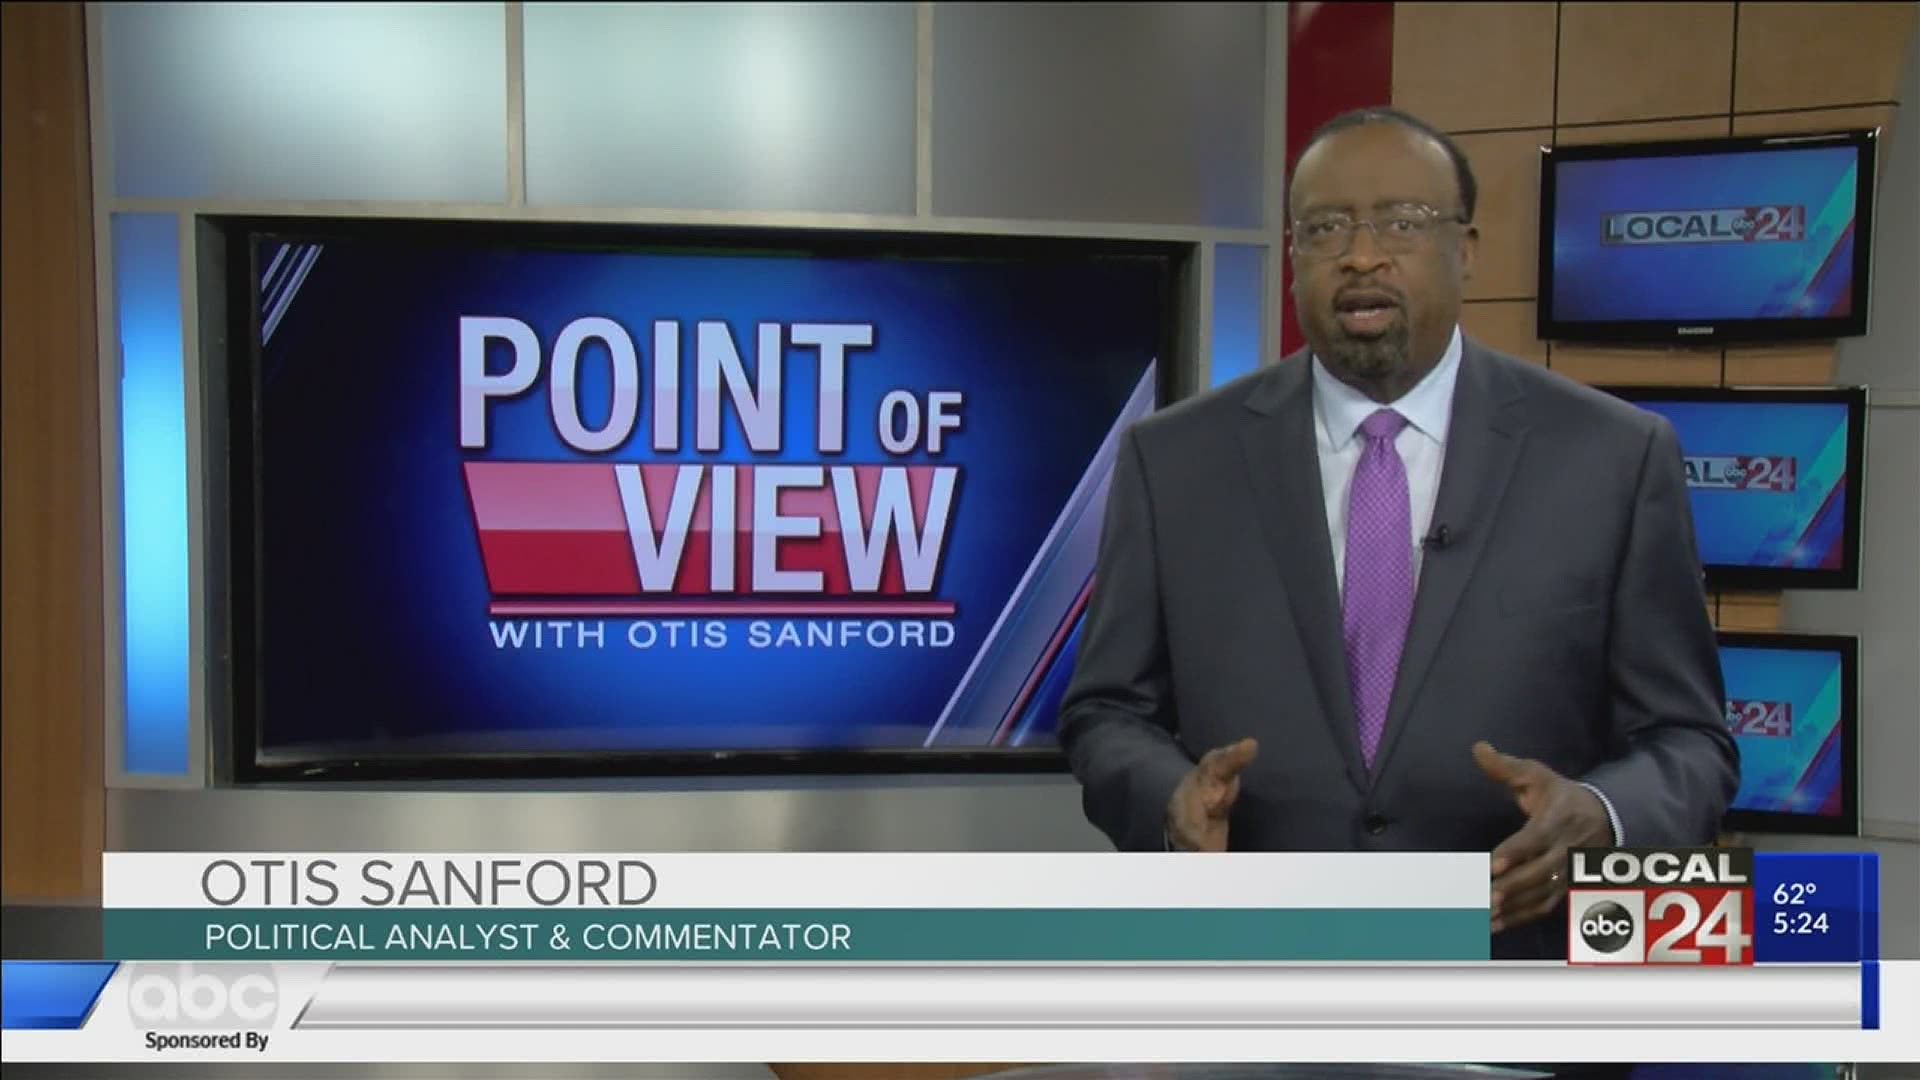 Local 24 News political analyst and commentator Otis Sanford shares his point of view on the latest directive from the Shelby County Health Department for COVID-19.